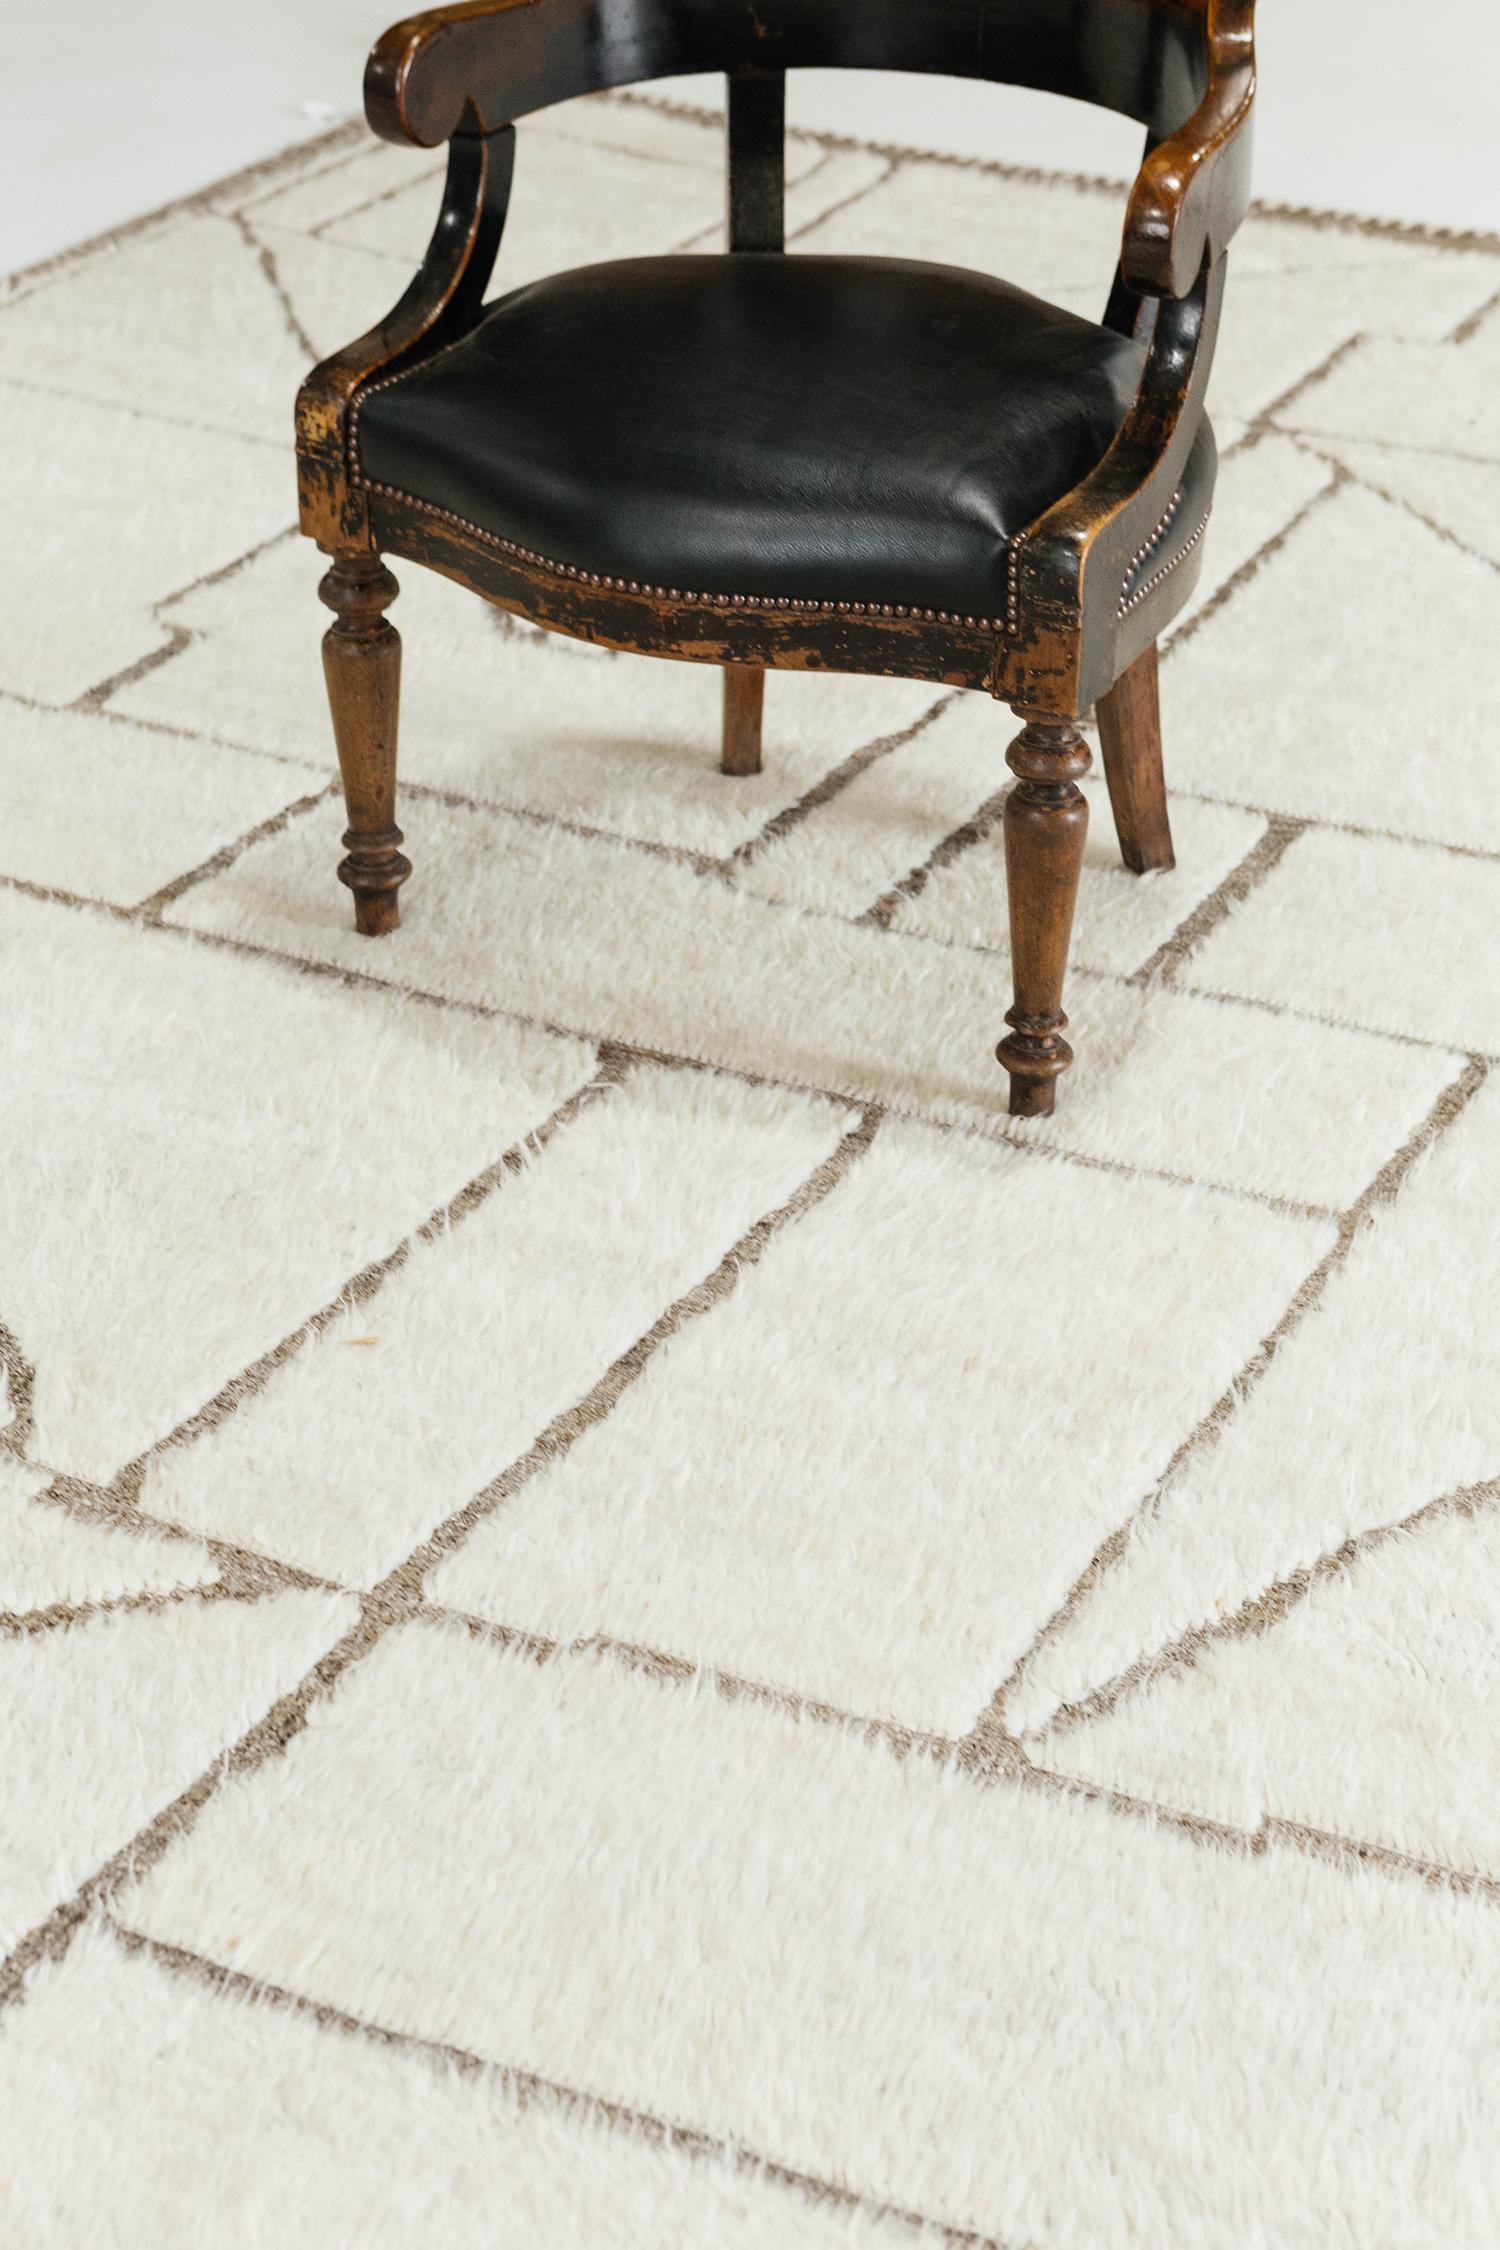 'Benhaddou' is a beautiful textured rug with embossed detailing into an overall geometric and contemporary design. Line work moving irregularly brings movement and are inspired by the Atlas Mountains in Morocco for the modern design world. The rug's